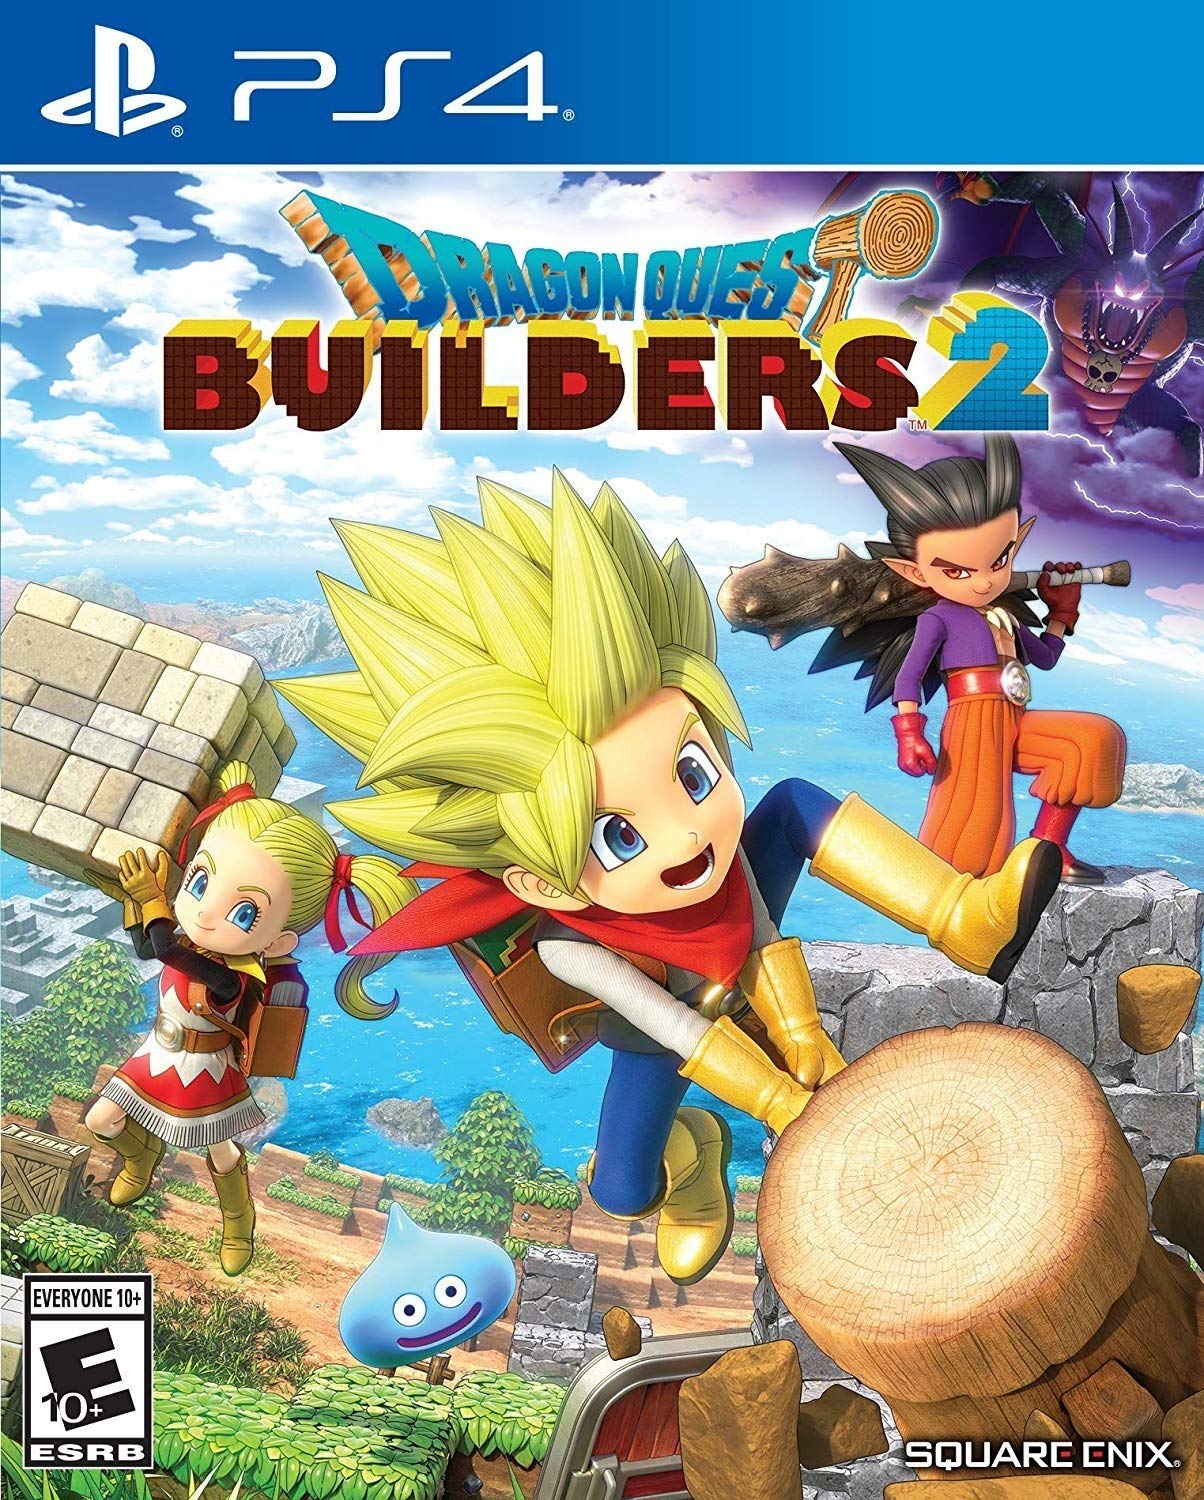 Dragon Quest Builders 2, Square Enix, PlayStation 4, [Physical], 92272 - image 1 of 11